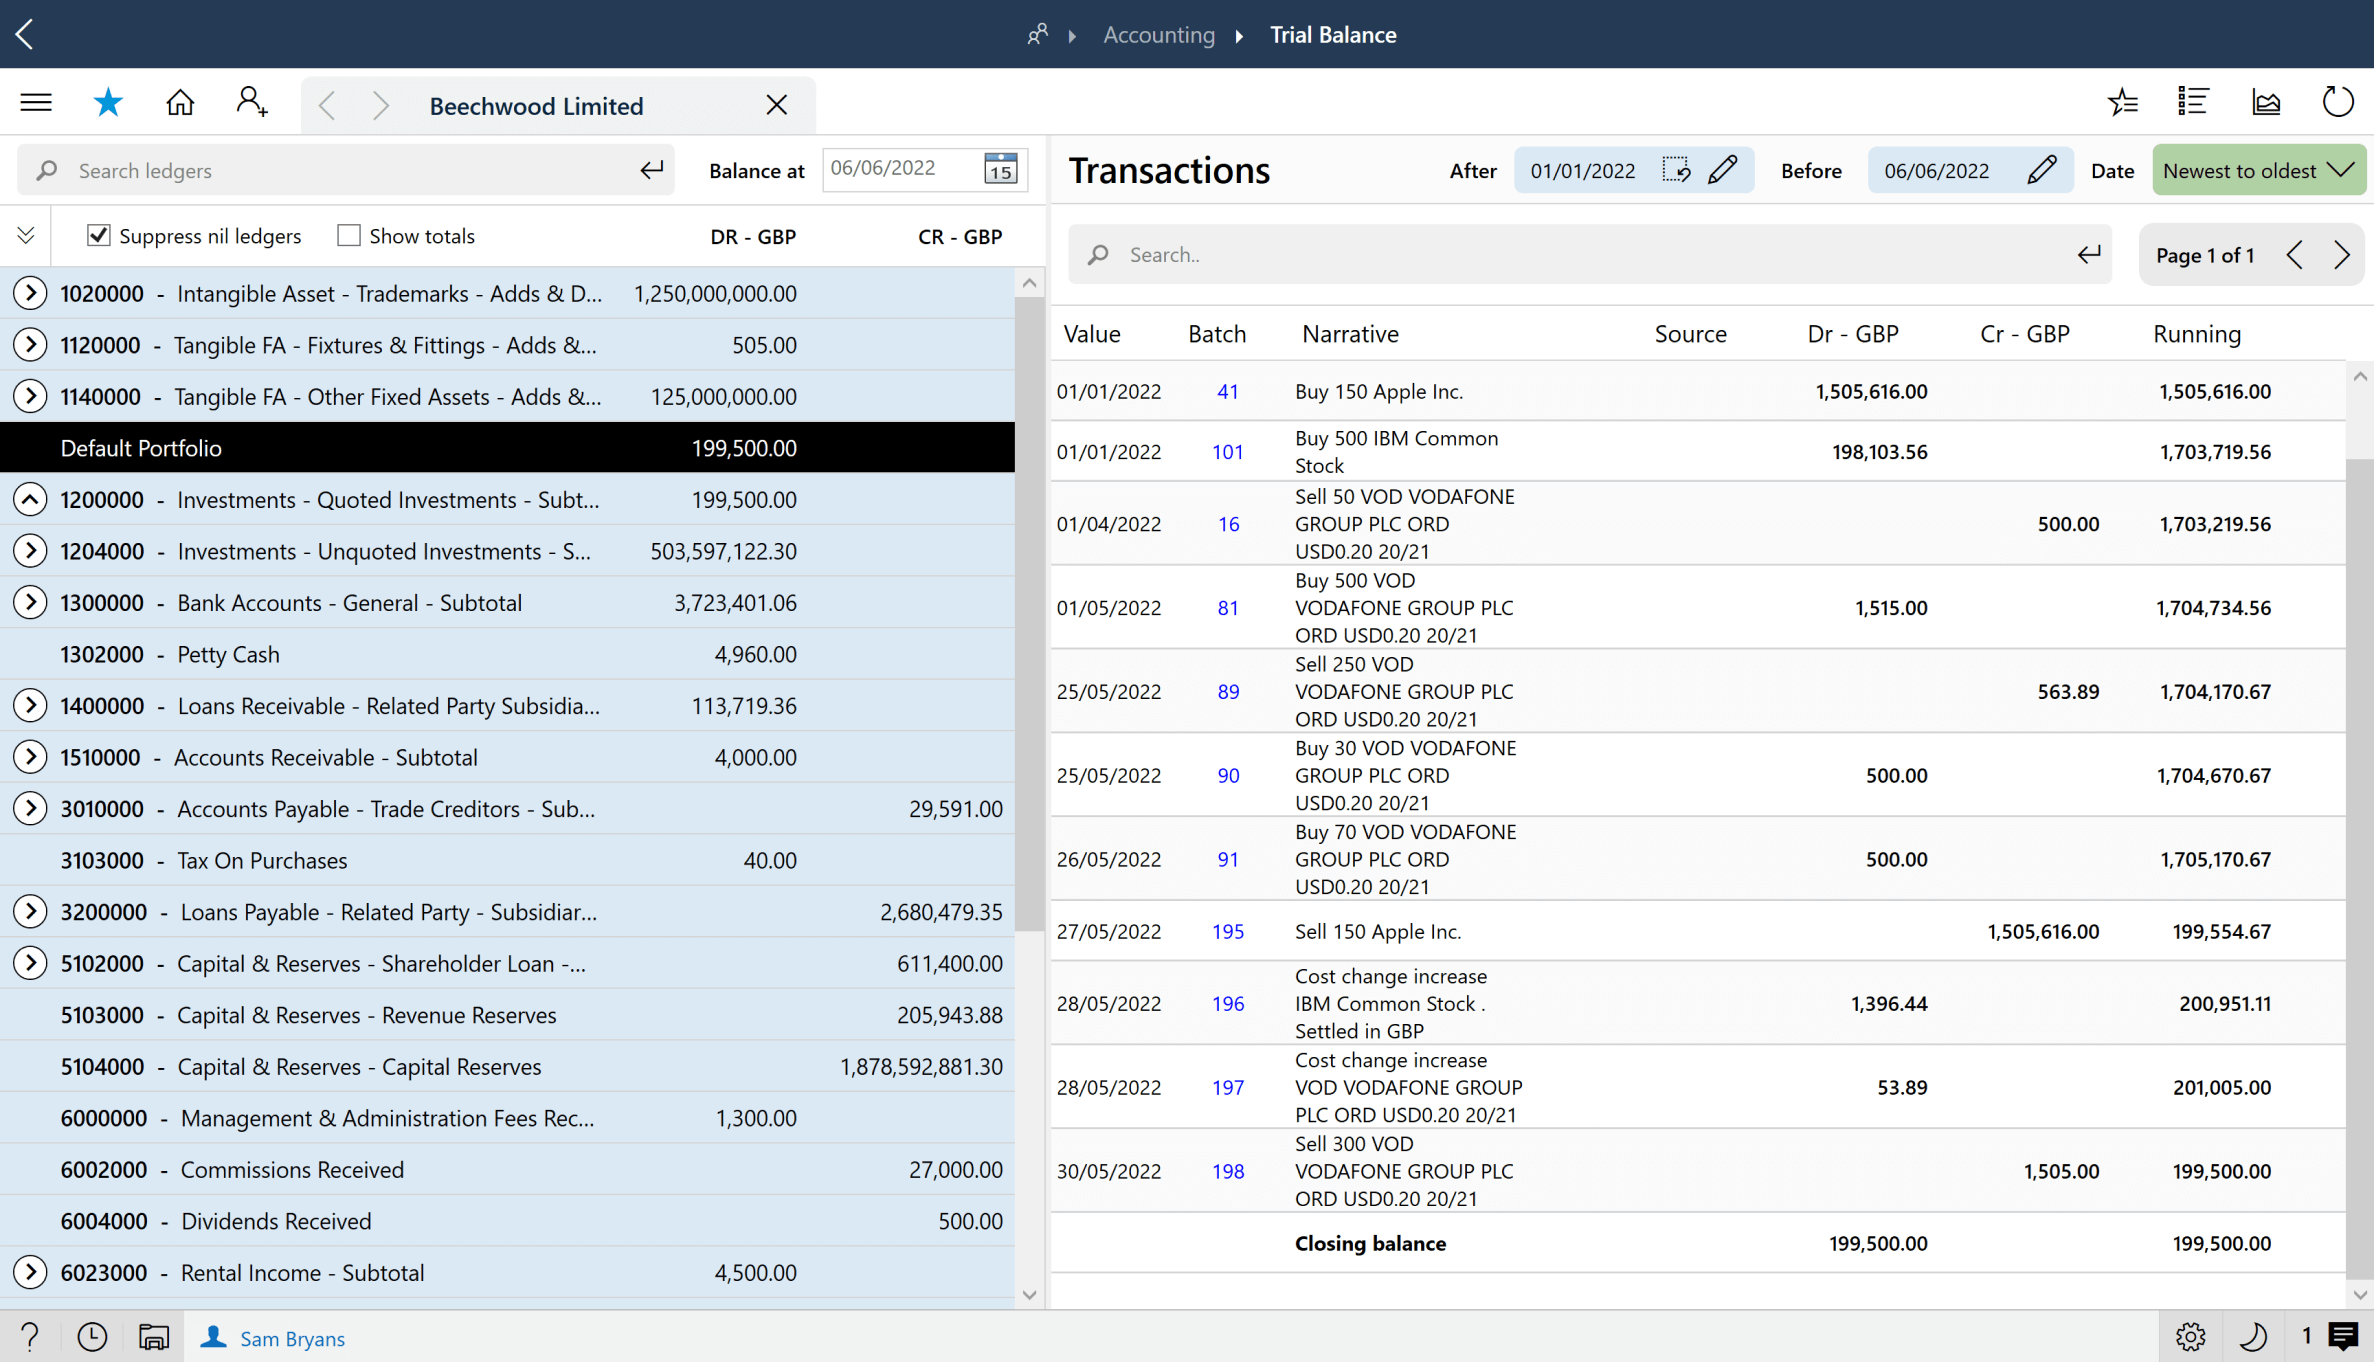 Example image of an Accounting screen within the PlainSail application